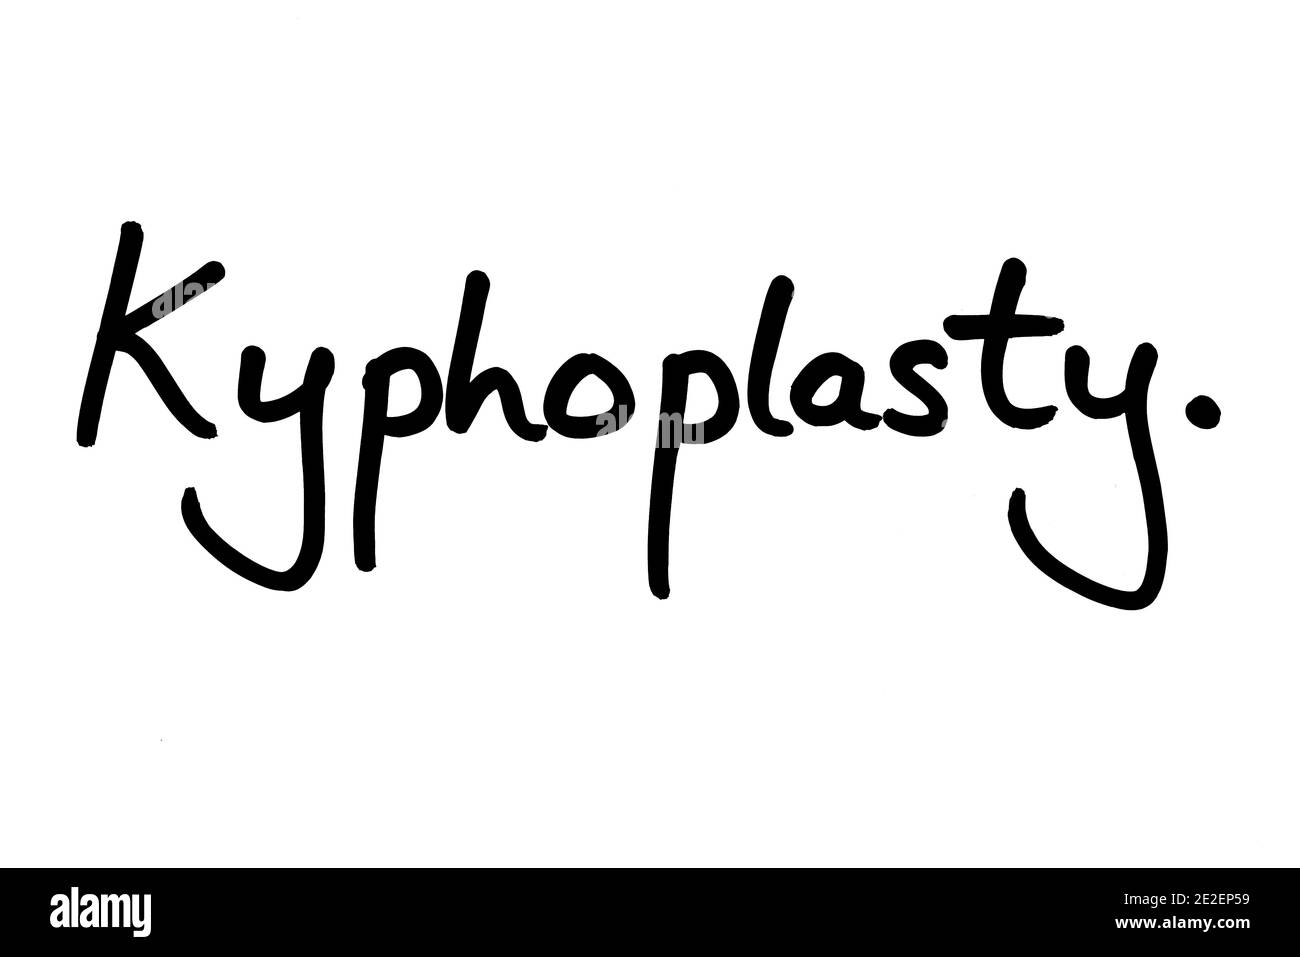 The term Kyphoplasty, handwritten on a white background. Stock Photo